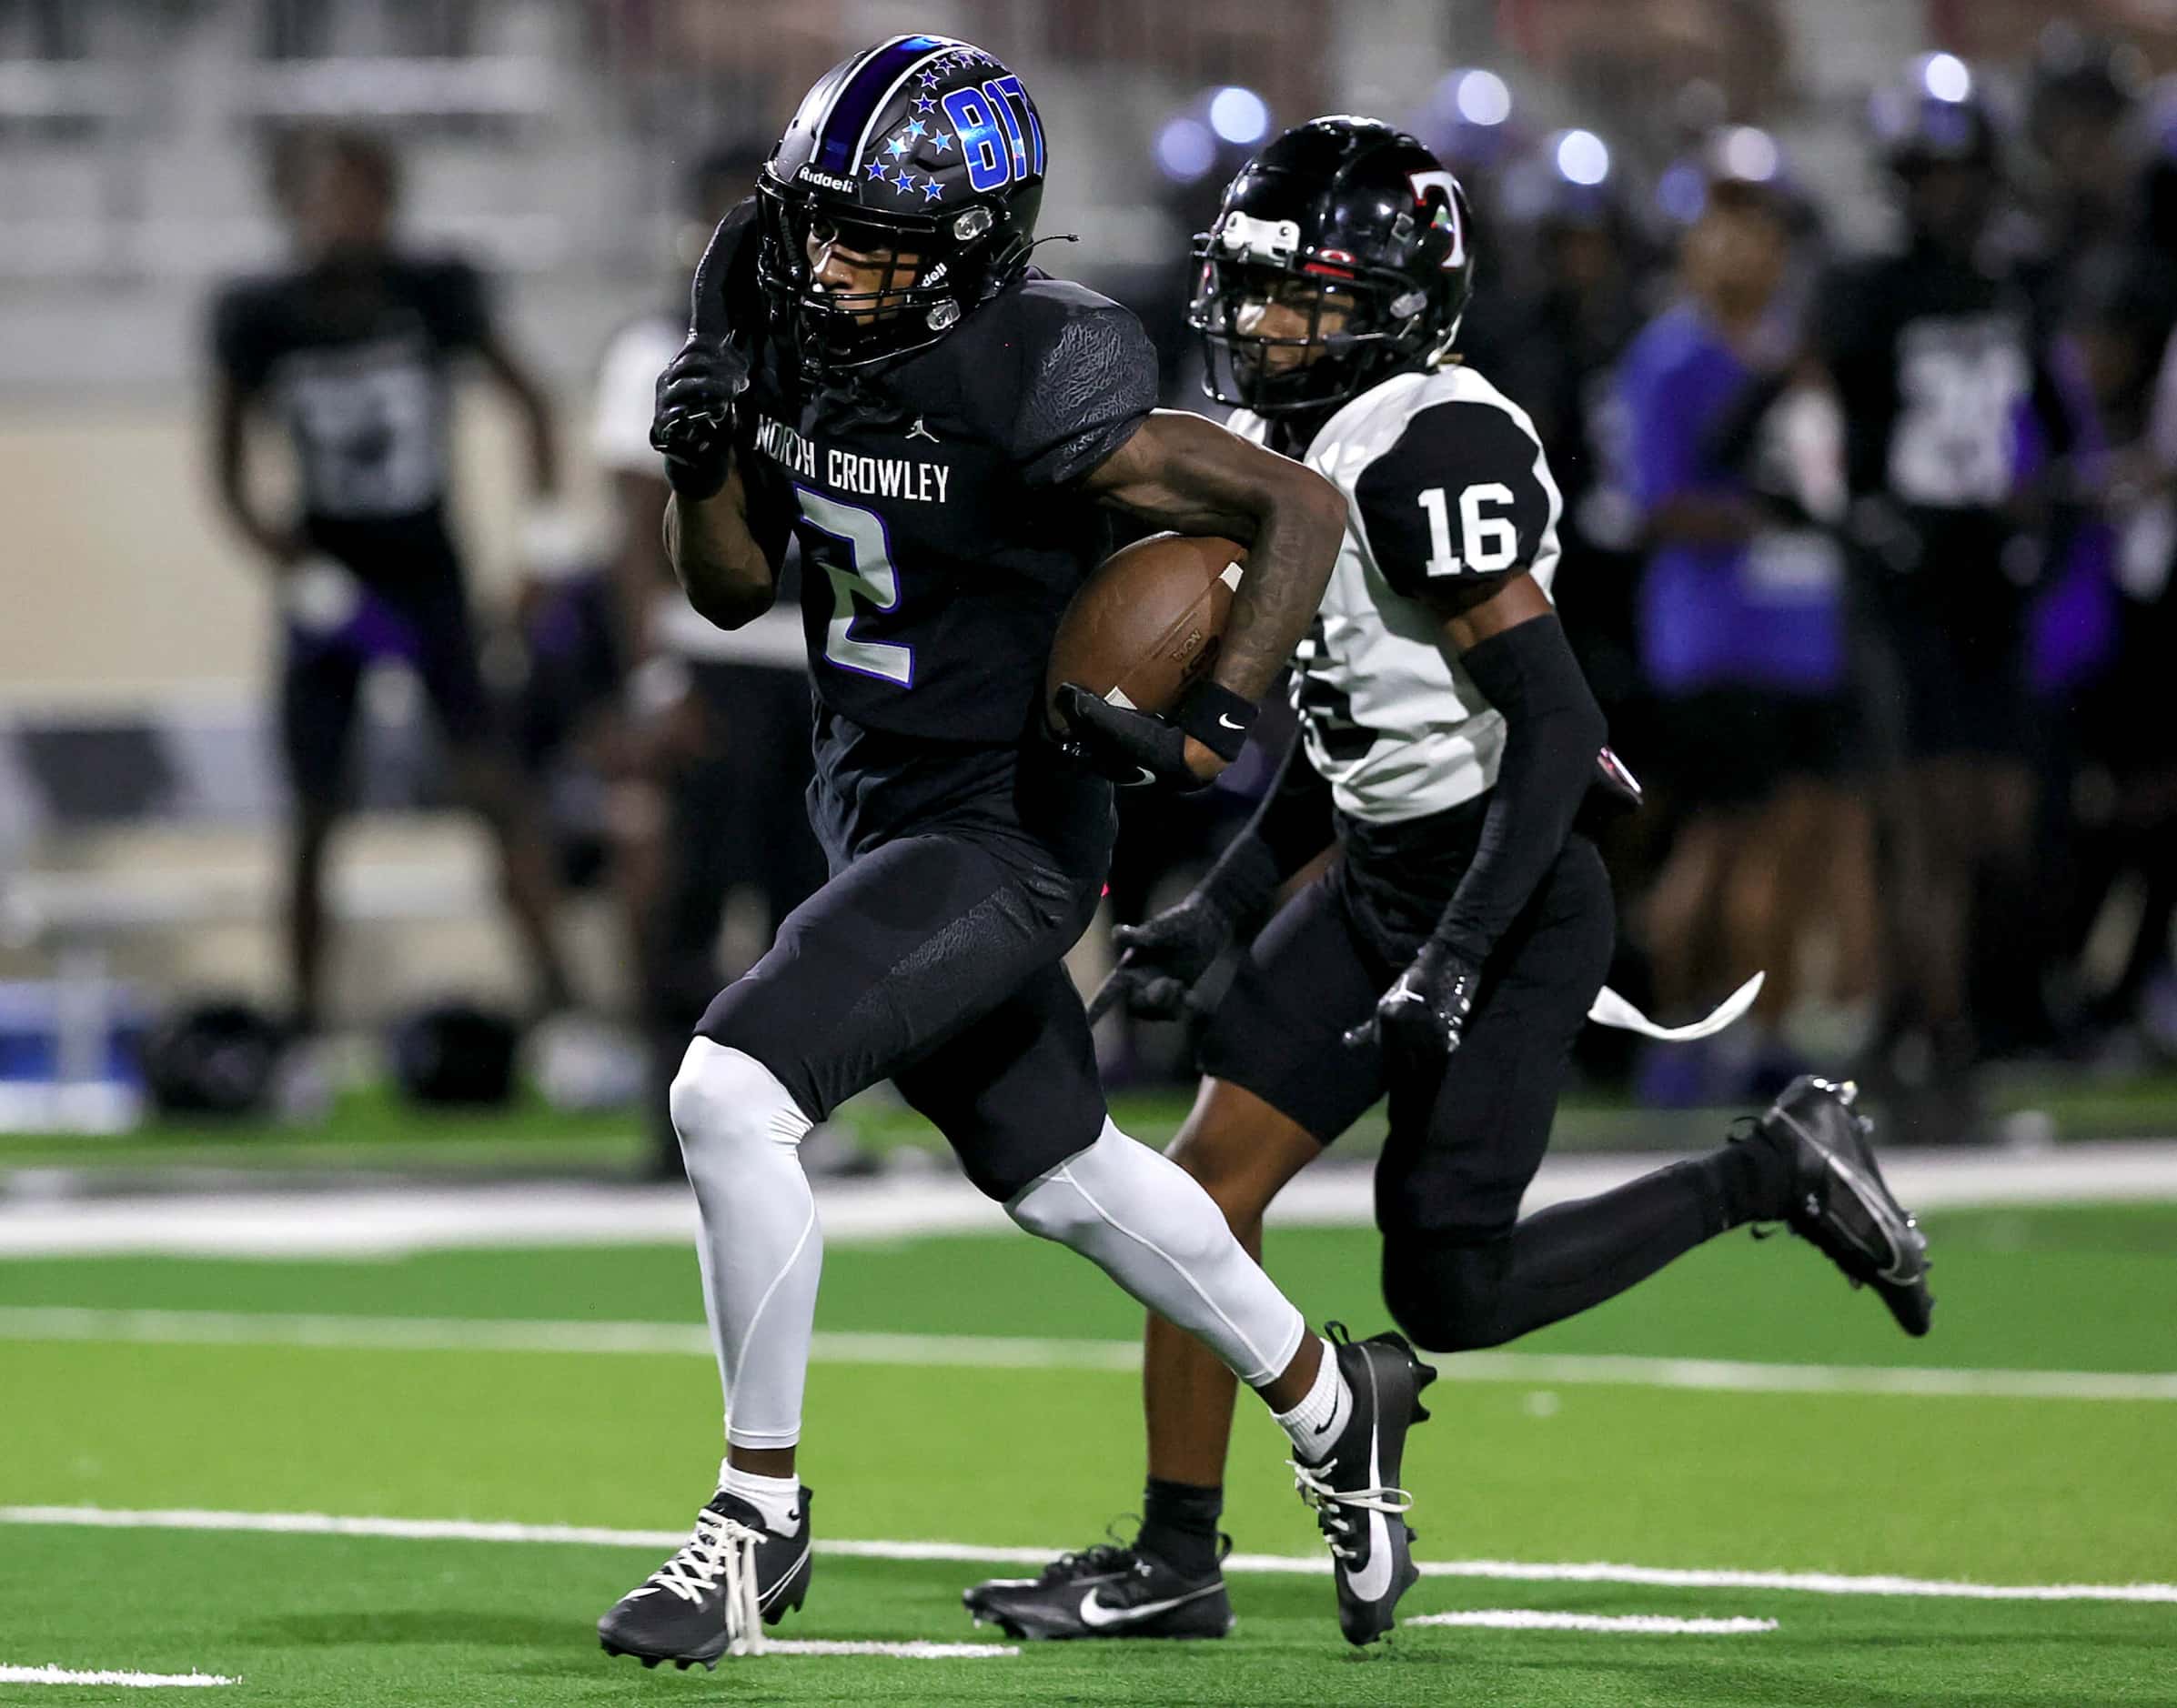 North Crowley wide receiver Mason Ferguson (2) gets past Euless Trinity defensive back...